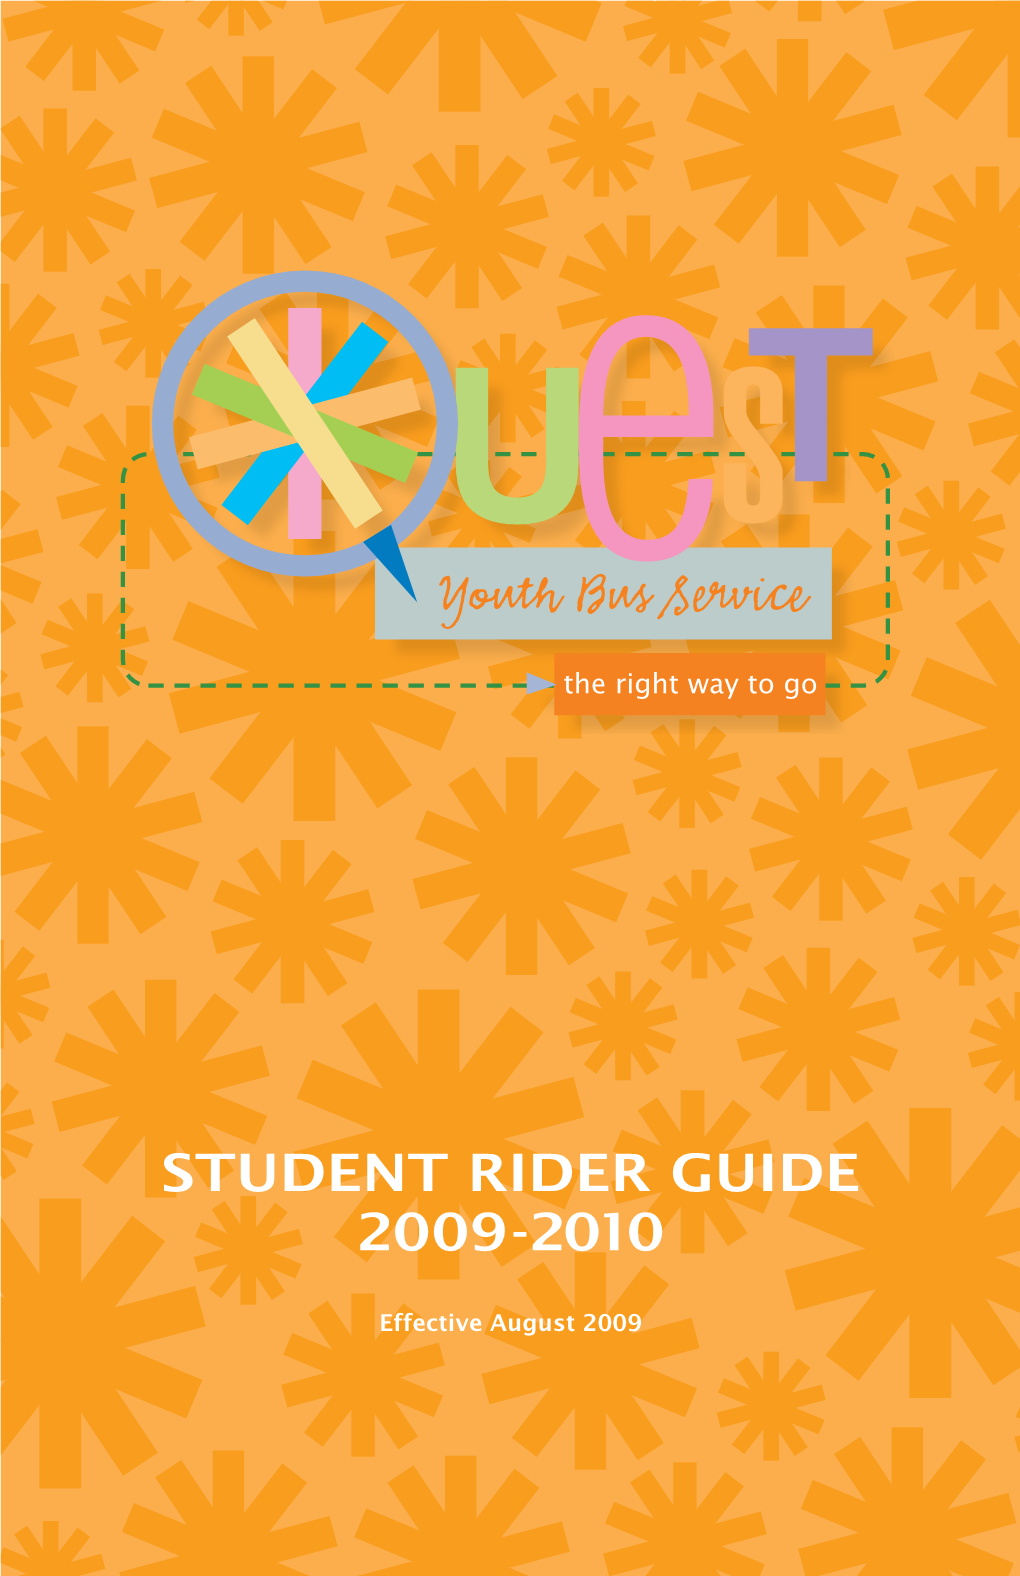 Student Rider Guide 2009-2010